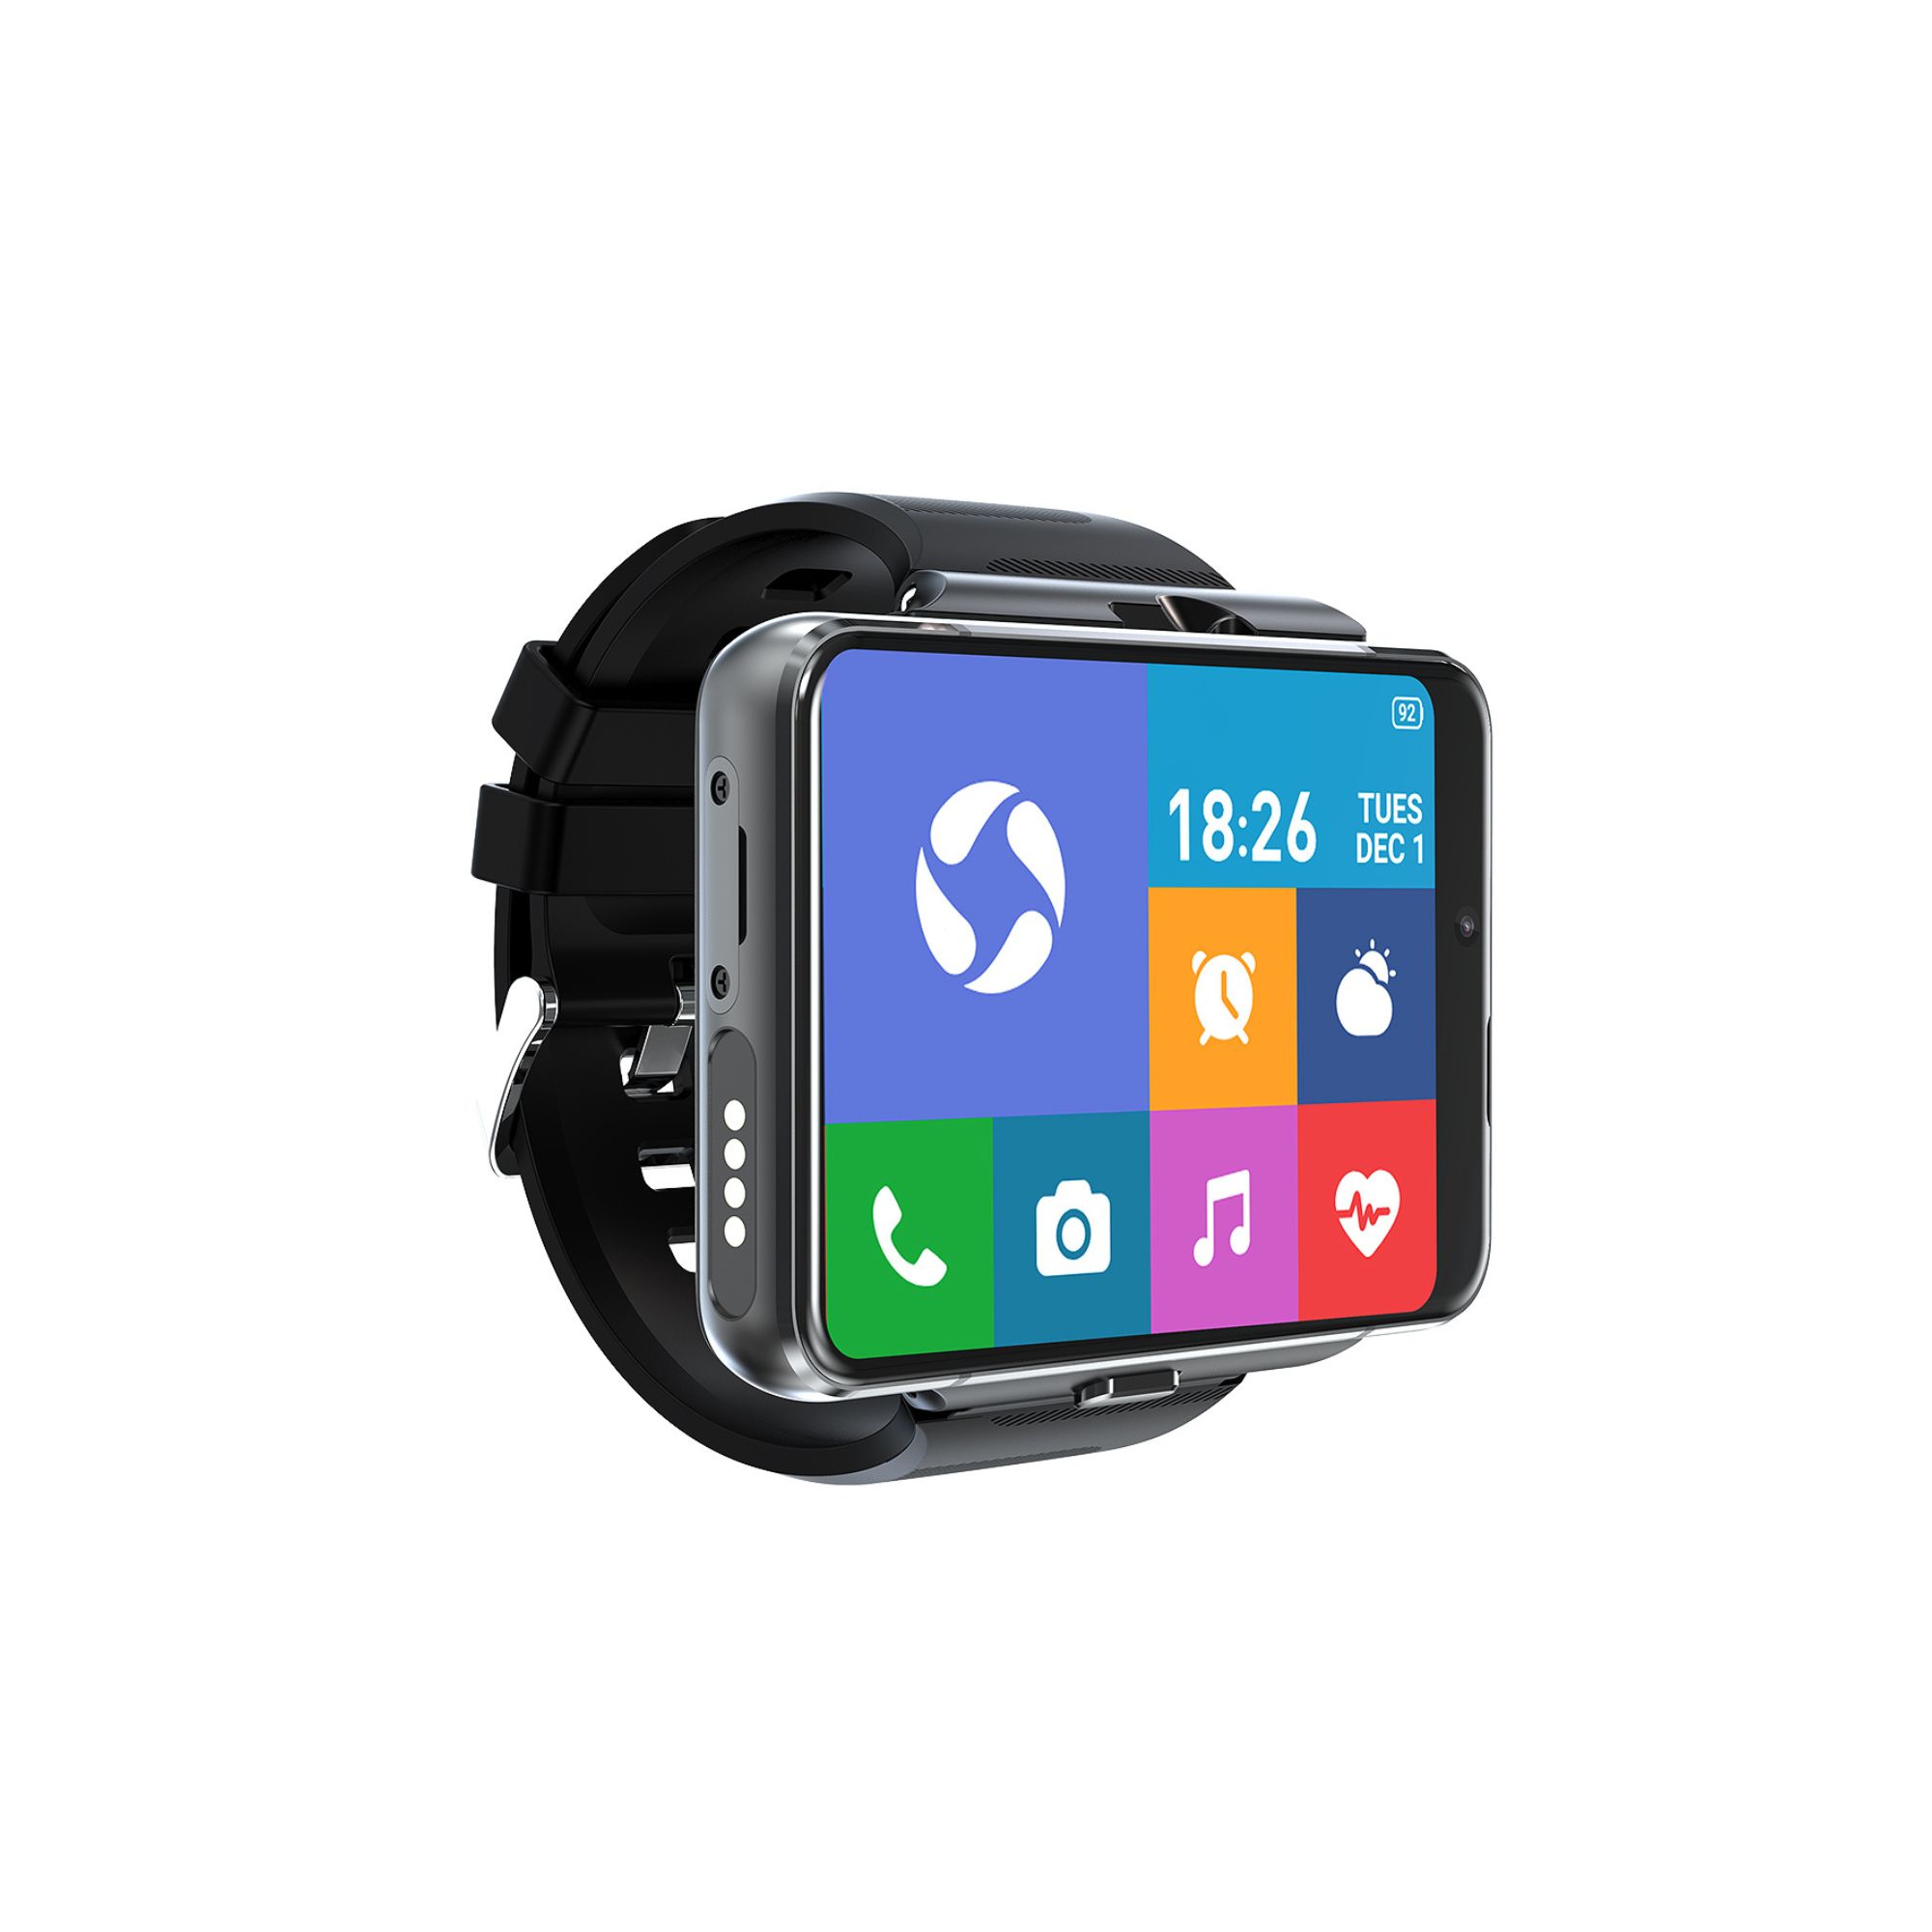 GPS Android Smartwatch with 4G LTE and 2.86 inch Touchscreen with Stainless Steel Body